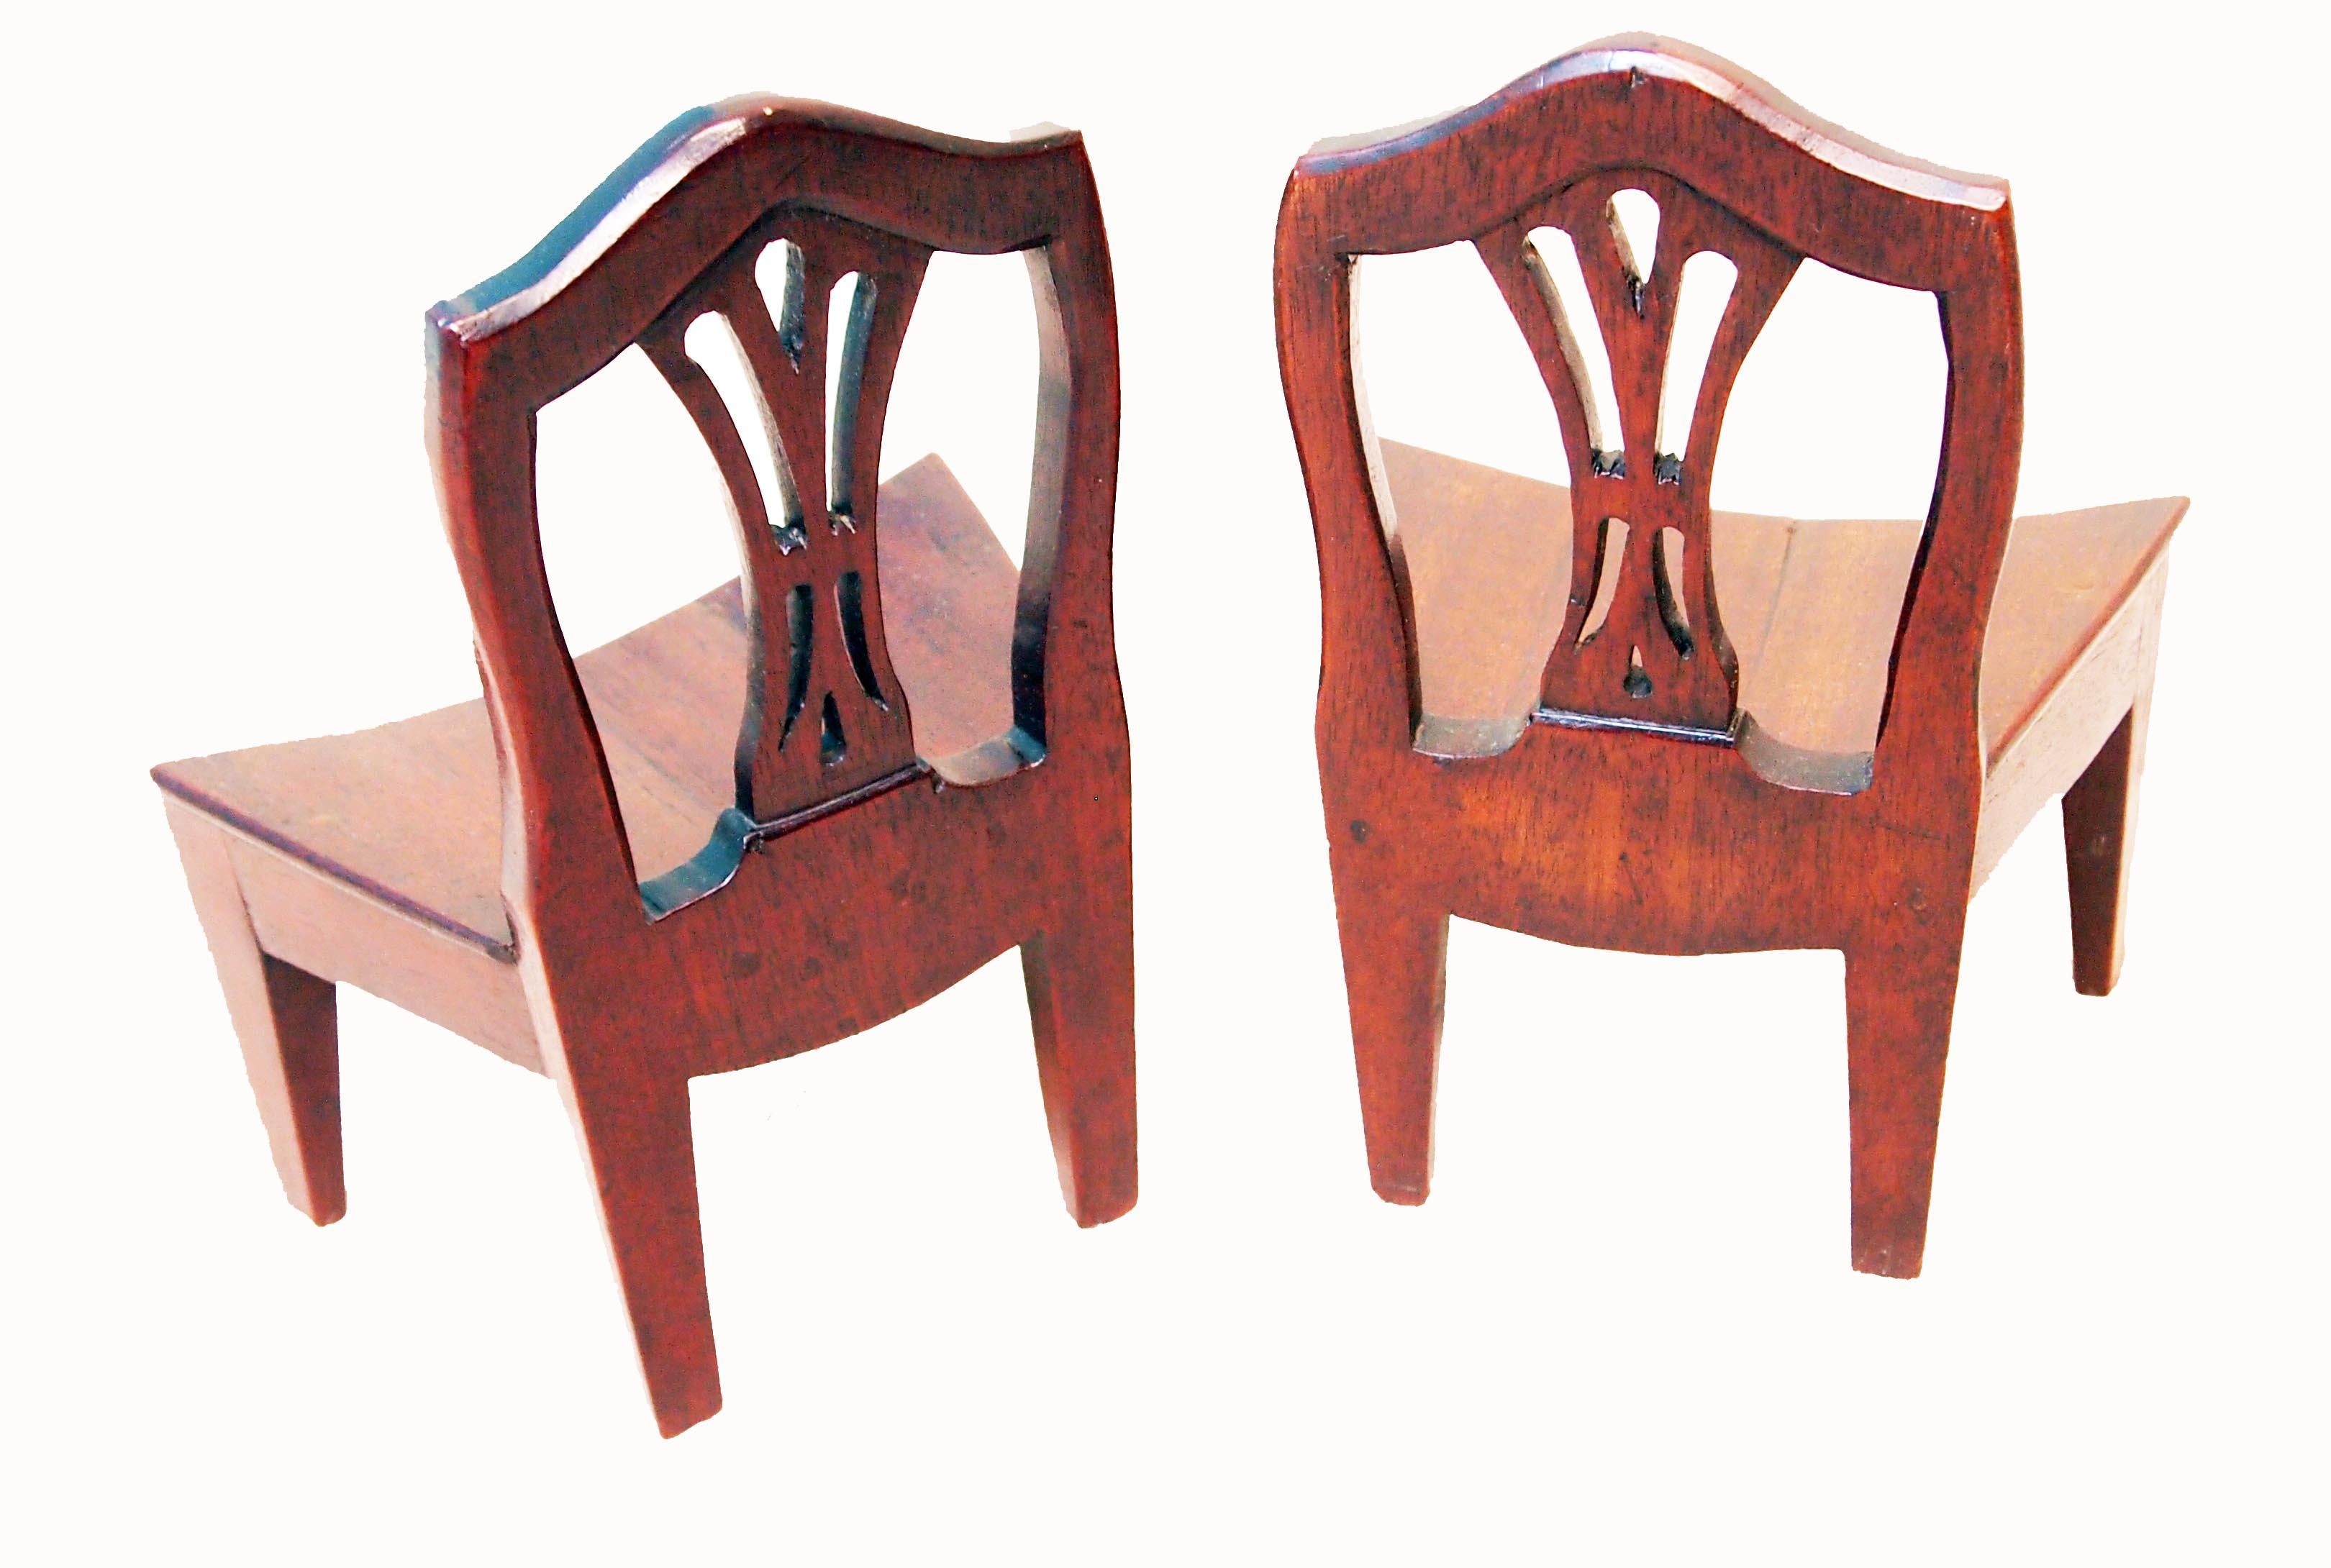 A very rare pair of 18th century mahogany miniature chairs
Having pierced splat backs and unusual bowed seats raised
On square tapered legs

(These are a most unusual example of 18th century Georgian 
miniature furniture. They are beautifully